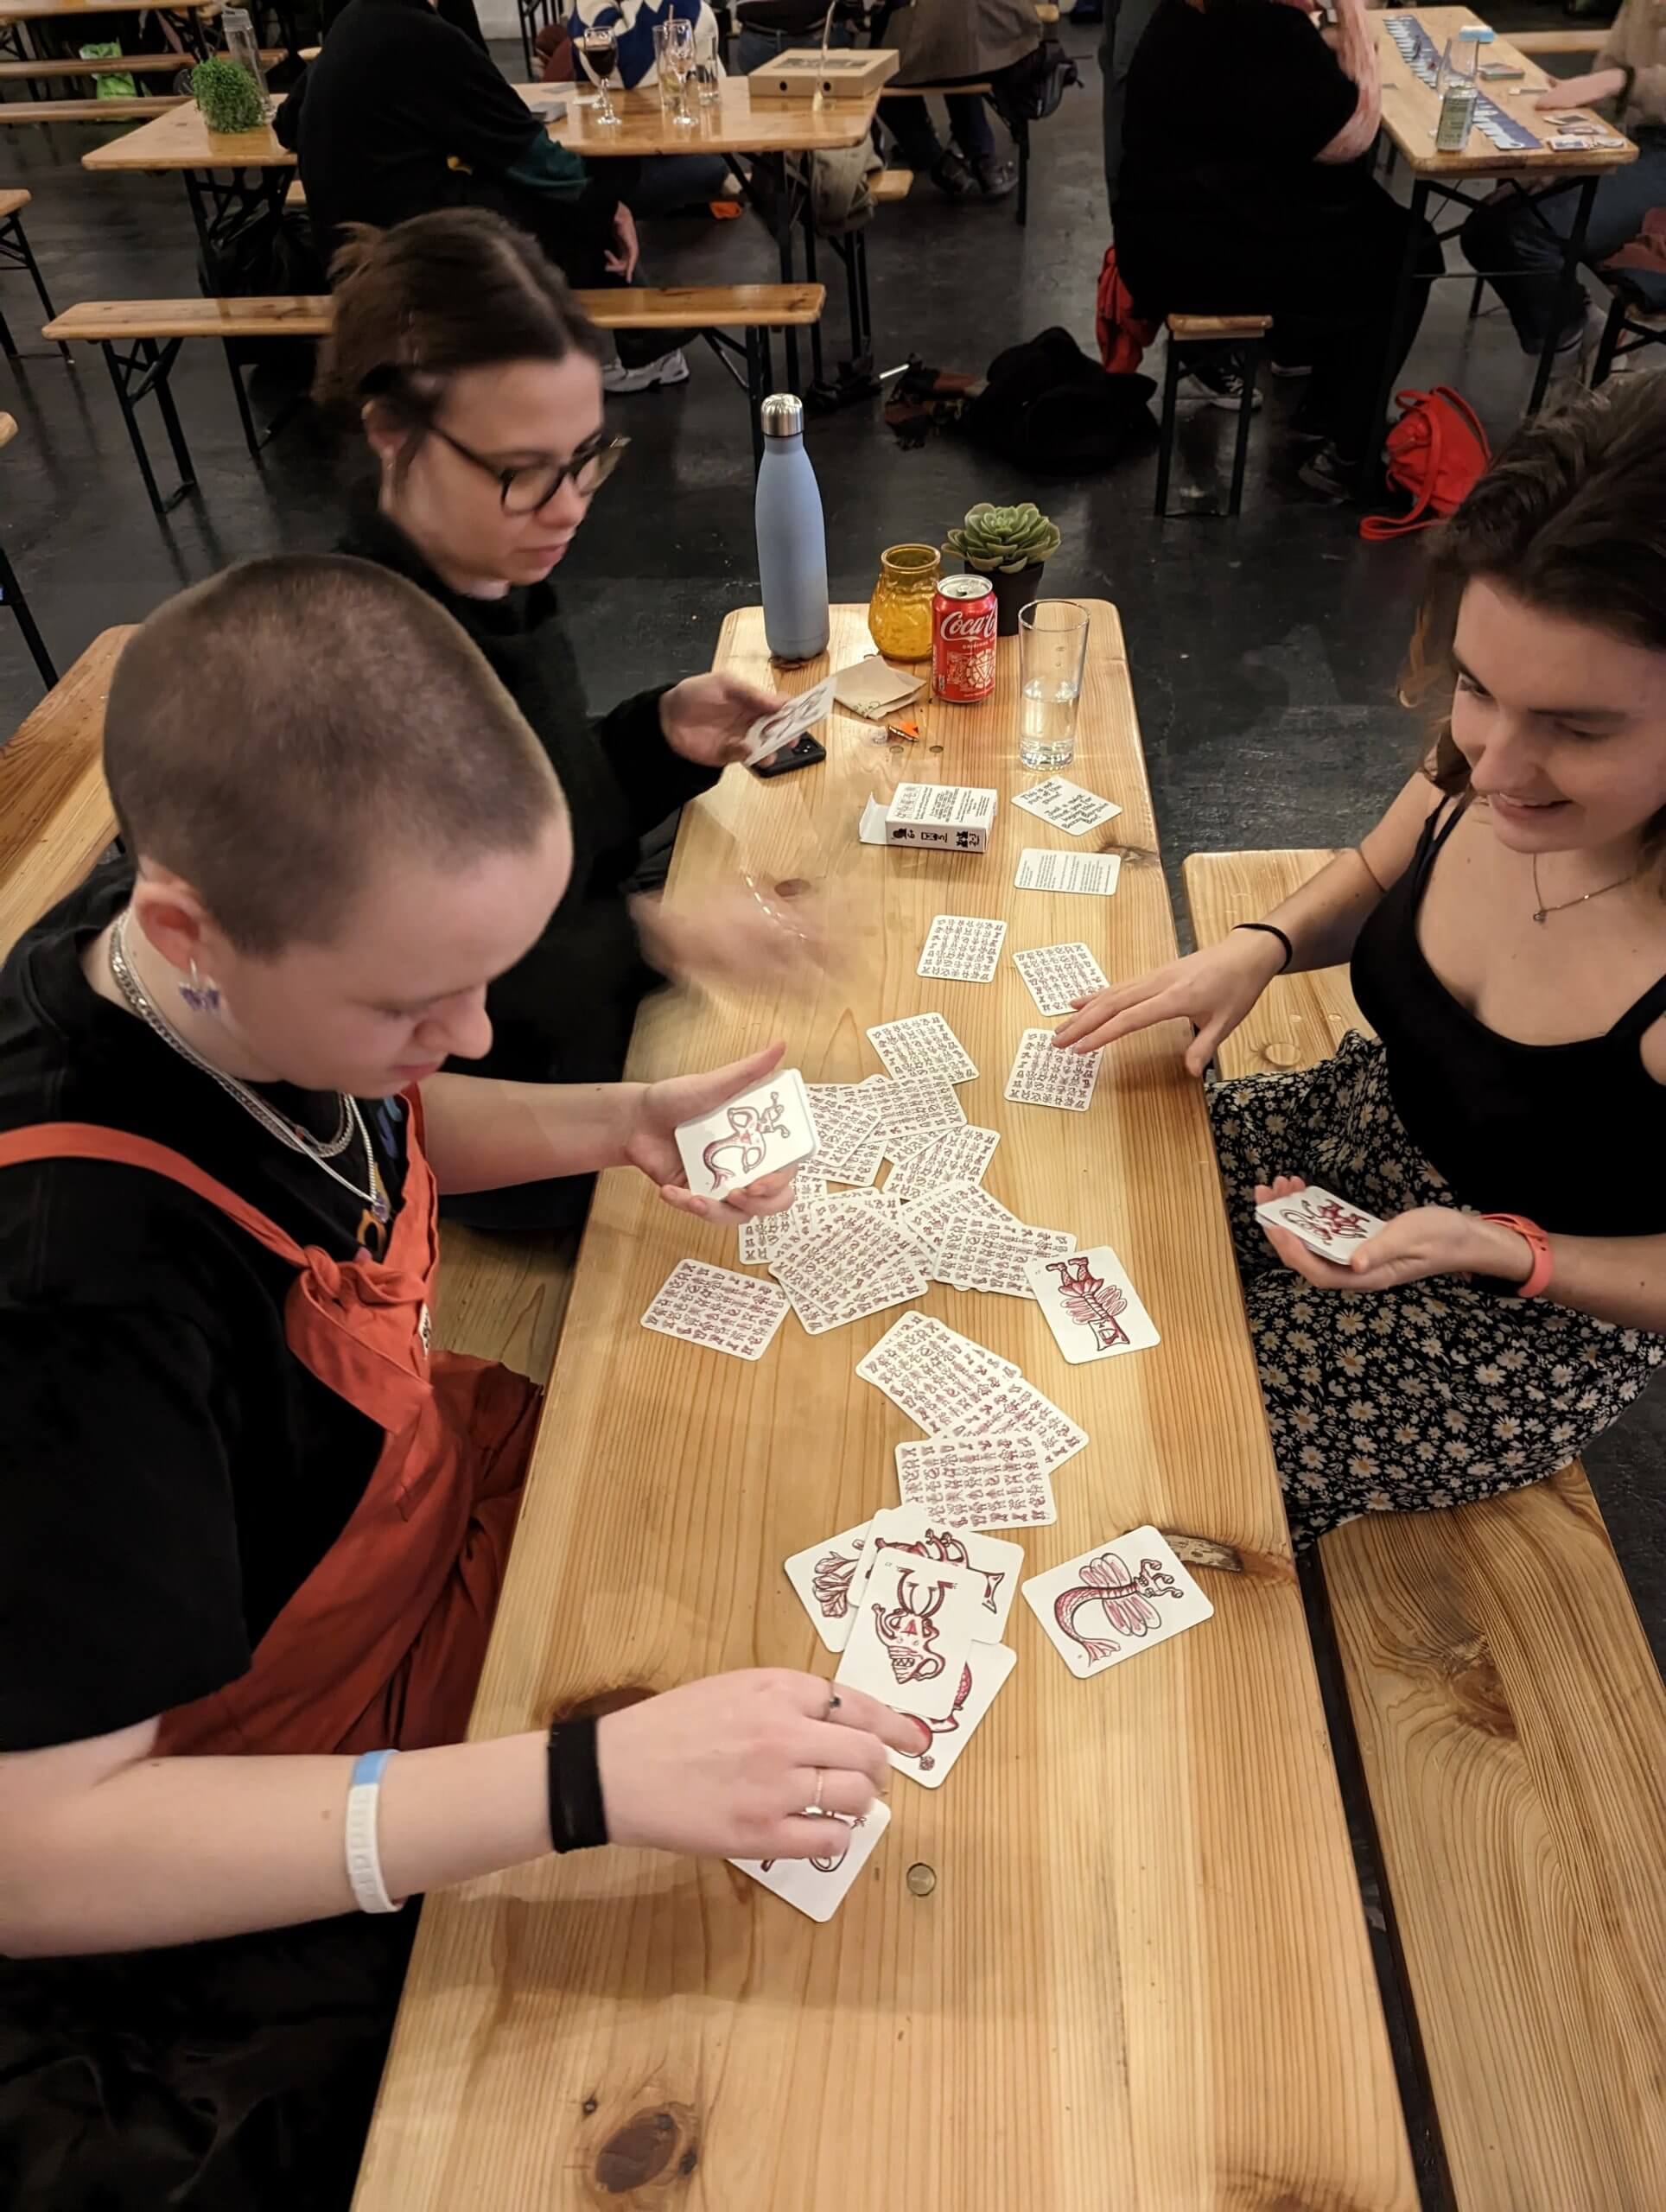 People playing the beetroots game. Cards are scattered on the table